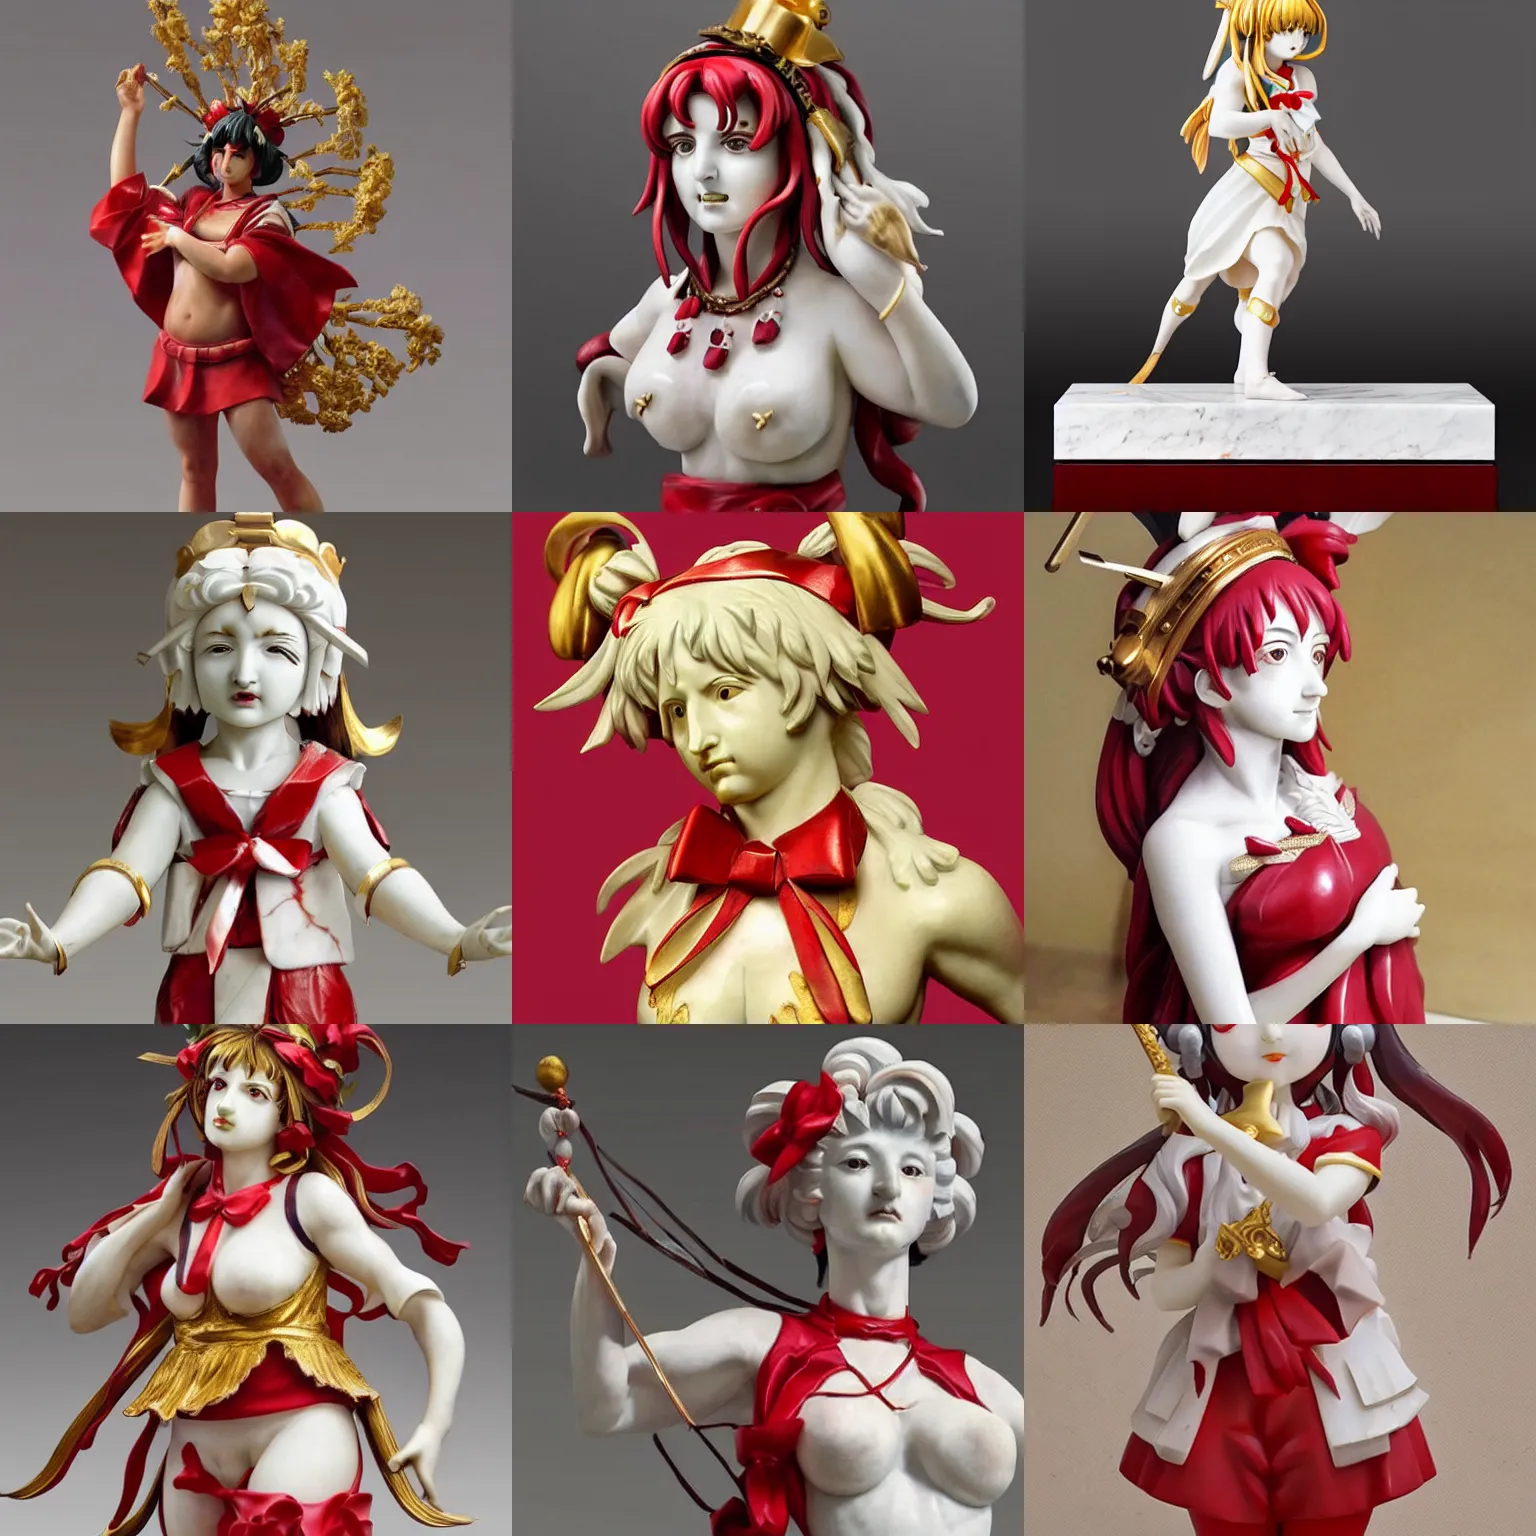 Prompt: a sculpture of reimu hakurei, marble, gold, classical art, masterpiece, anatomically correct, ultra realistic, hyperrealistic, extreme details